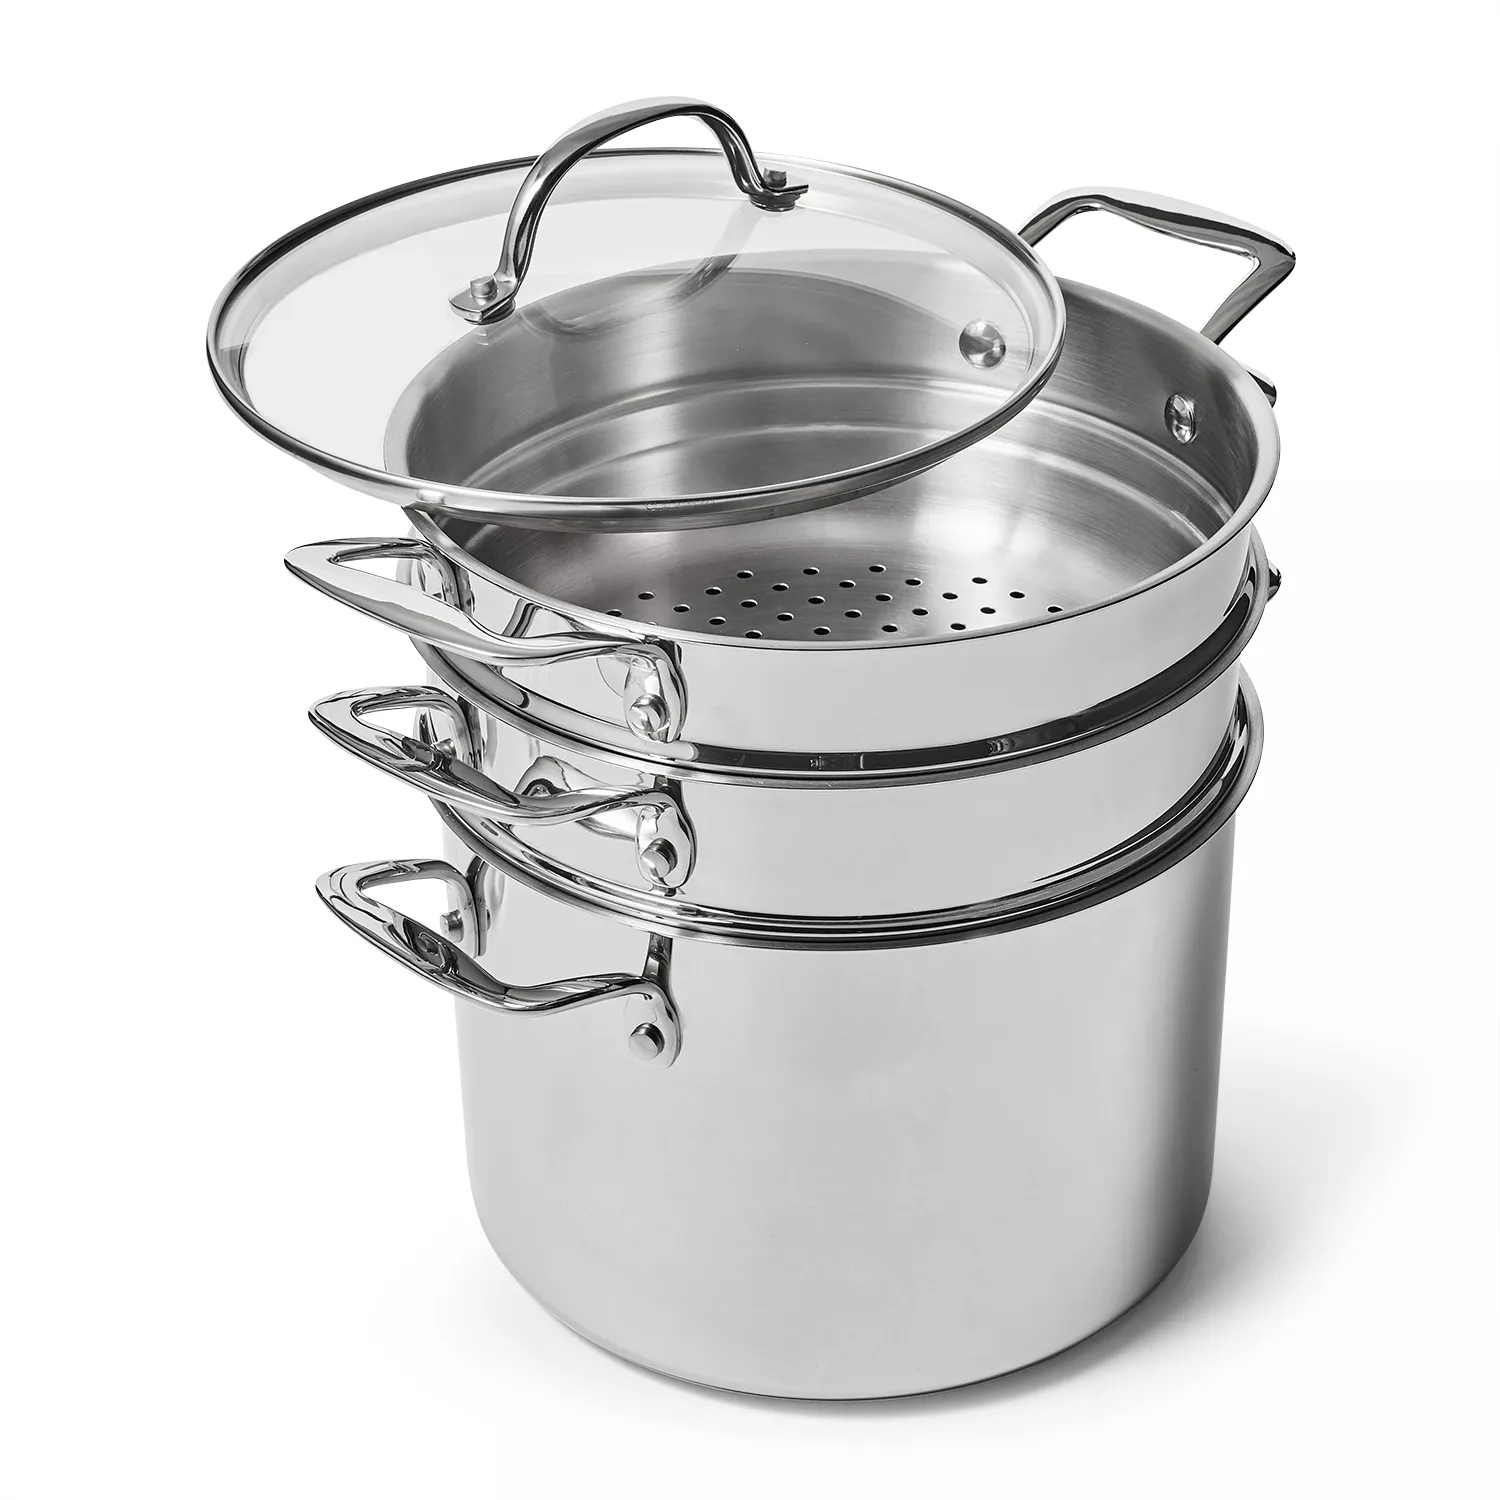 HENCKELS 8.5-Qt. Stainless Steel Pasta Pot with Straining Baskets